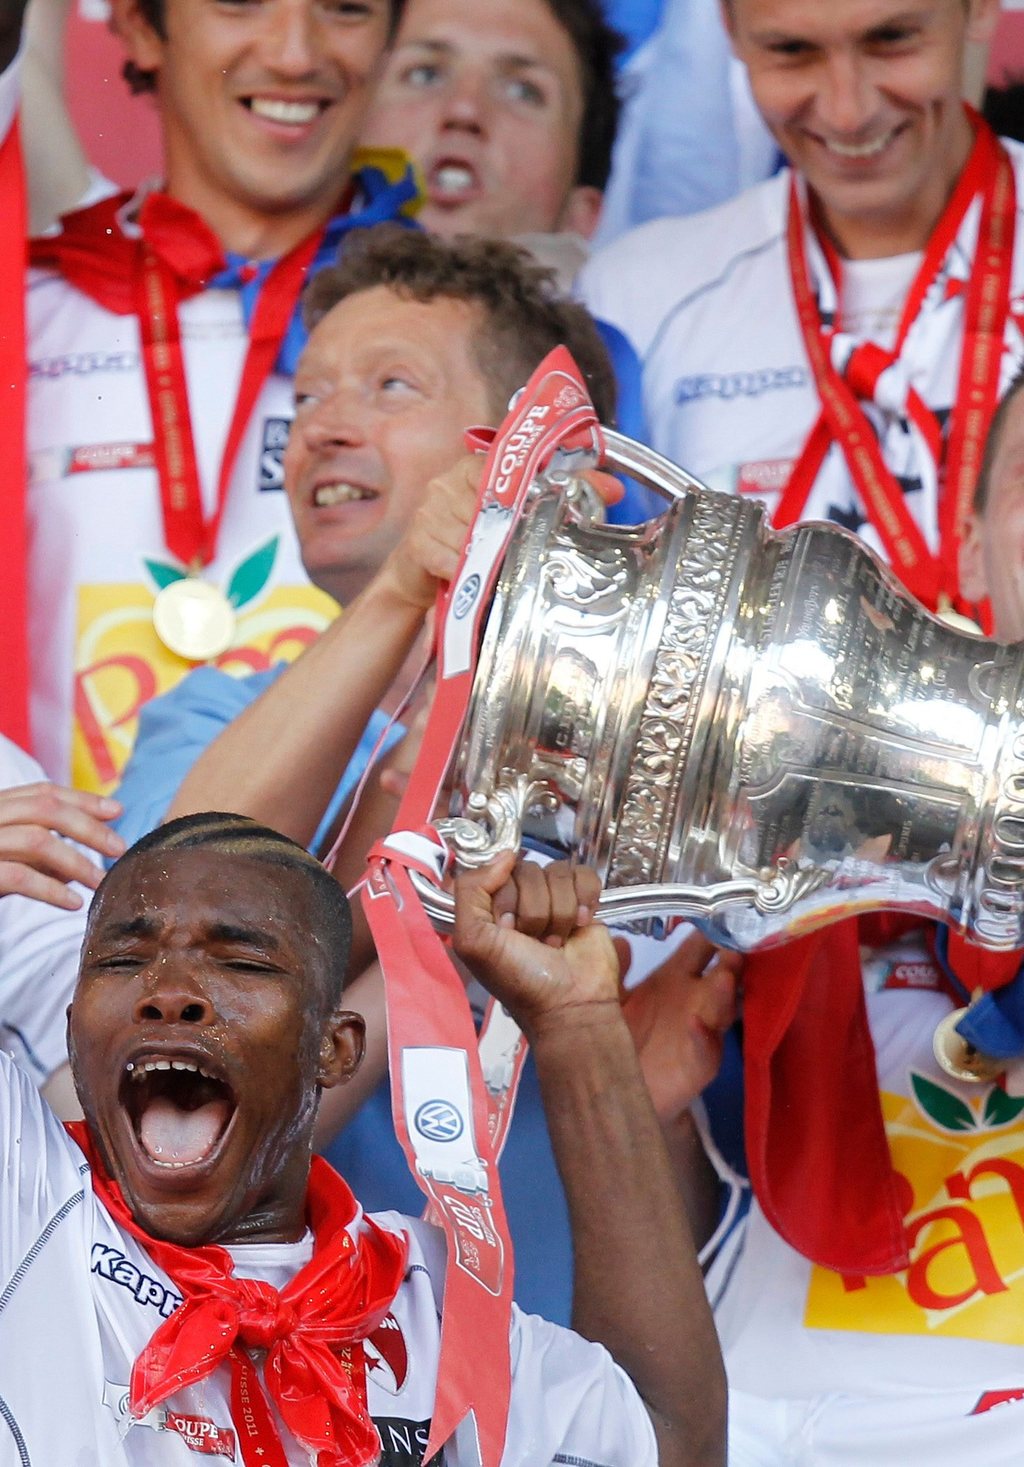 Sion's Geoffroy Serey Die celebrates after winning the Swiss Cup final soccer match between Neuchatel Xamax and FC Sion at the St. Jakob-Park stadium in Basel, Switzerland, Sunday, May 29, 2011. (KEYSTONE/Peter Klaunzer)